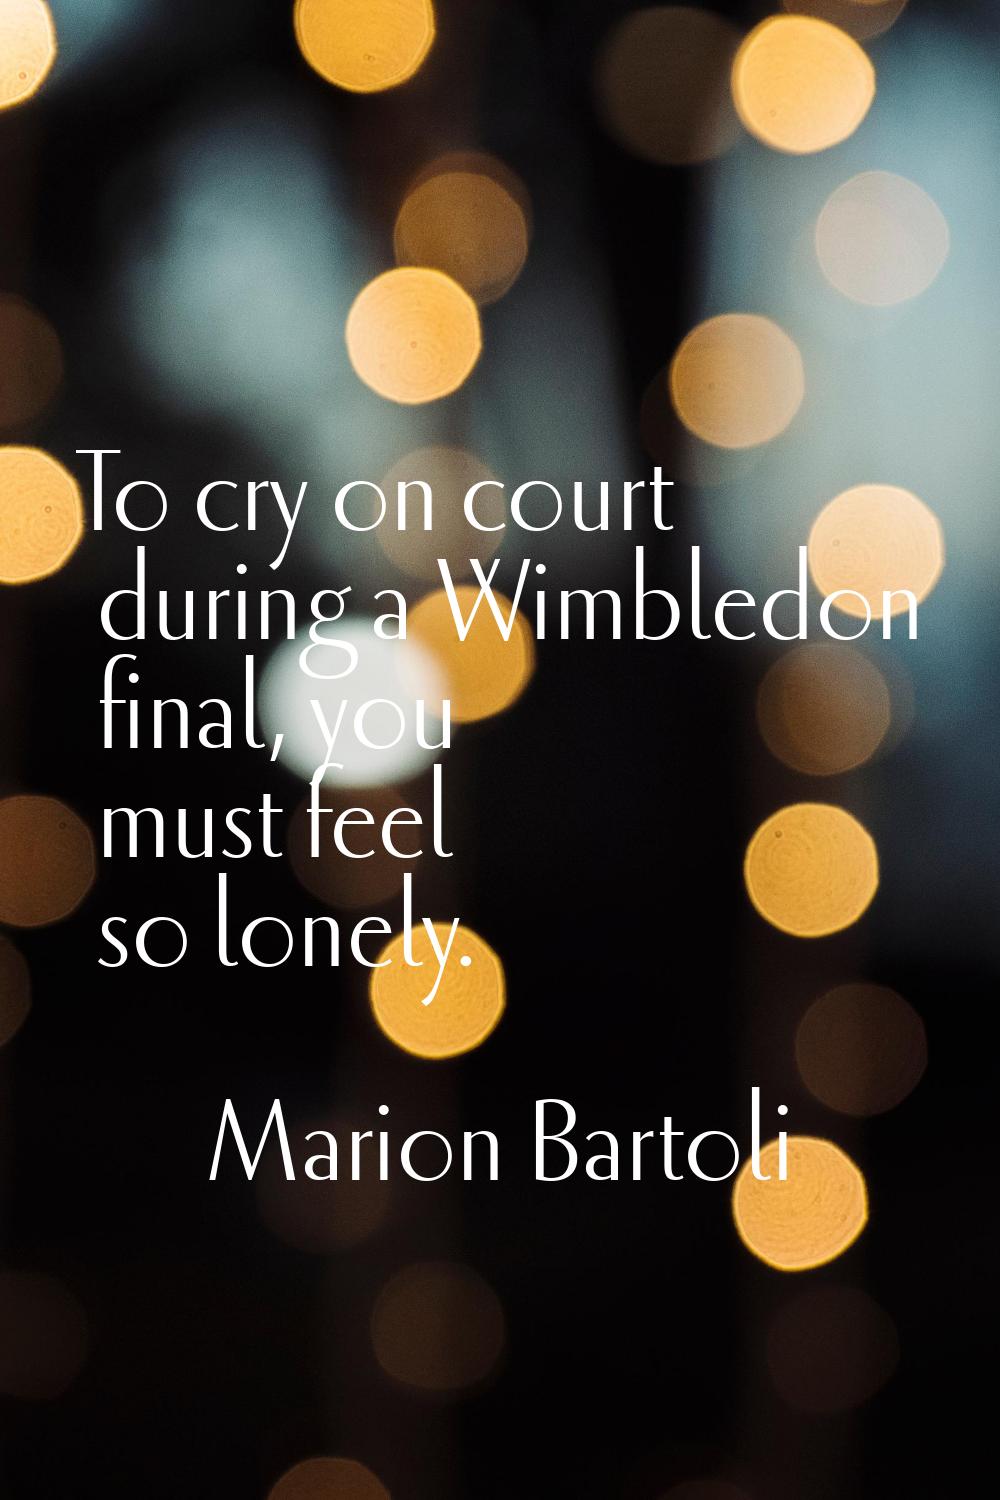 To cry on court during a Wimbledon final, you must feel so lonely.